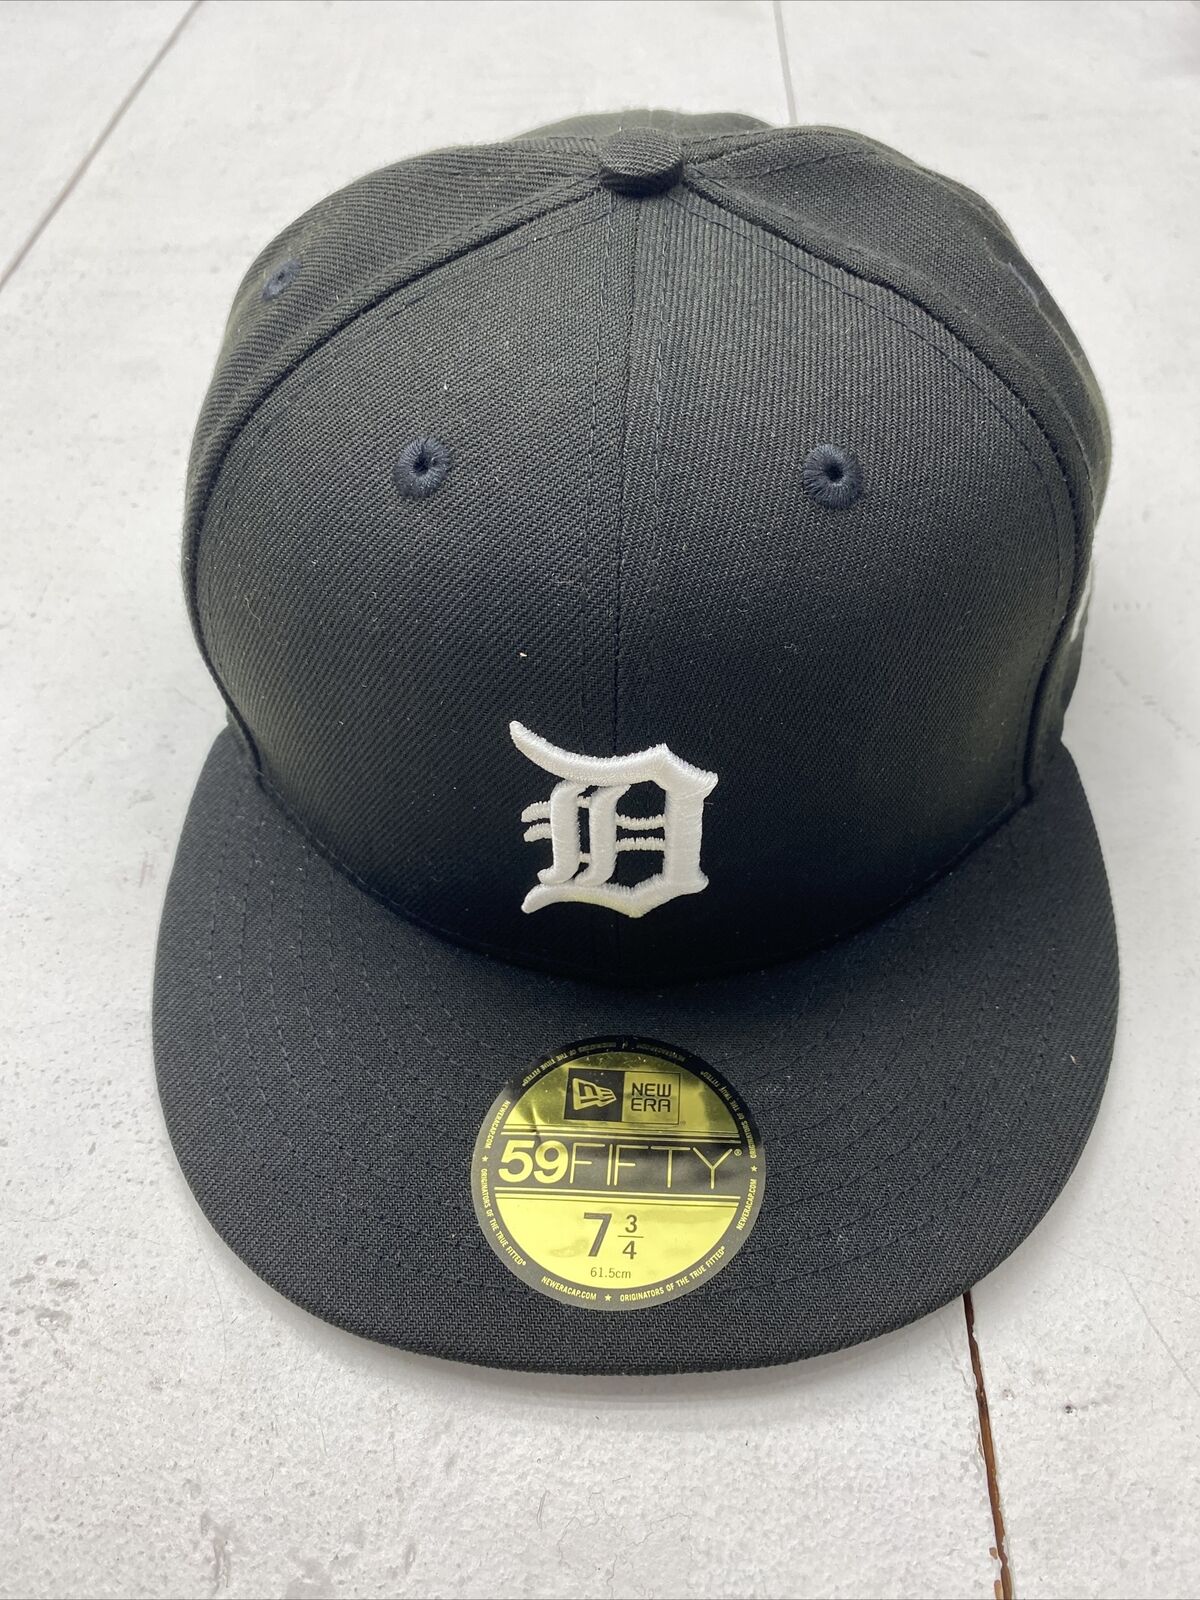 New Era 59Fifty MLB Detroit Tigers 7 1/4 Fitted Hat.